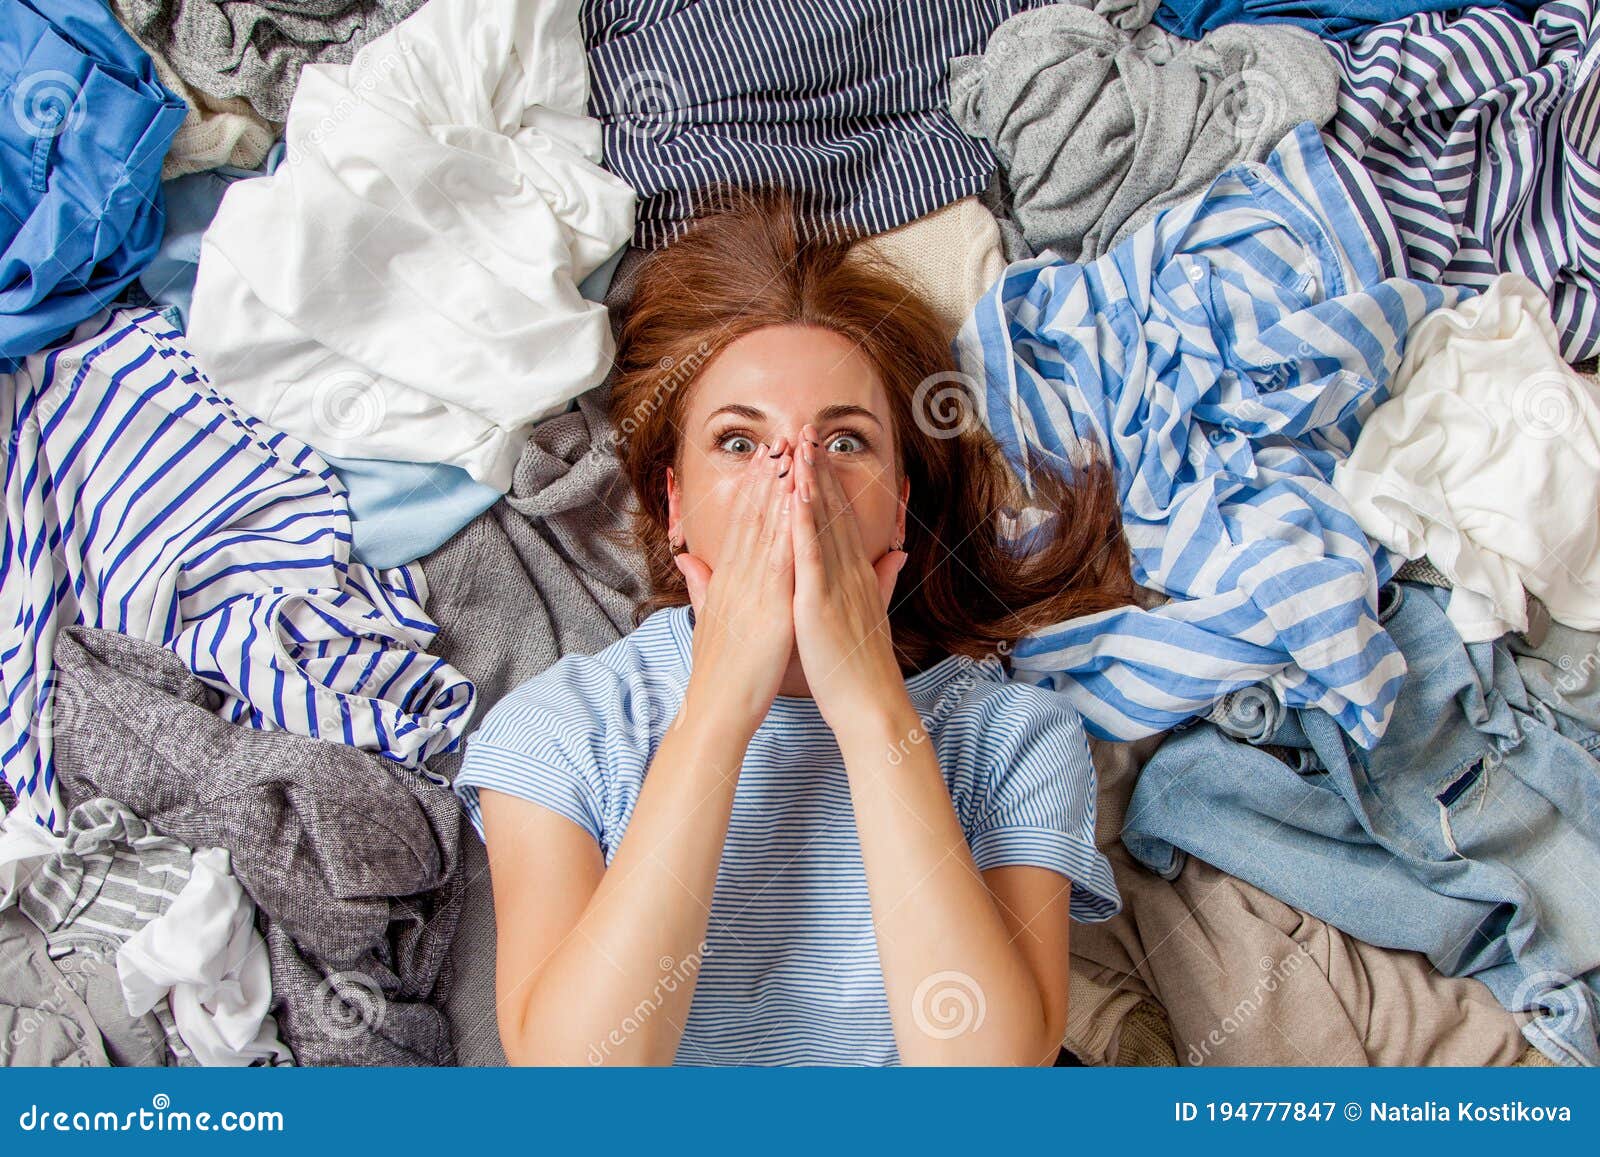 beautiful caucasian woman smiling and lying down with clutter clothes on the floor.